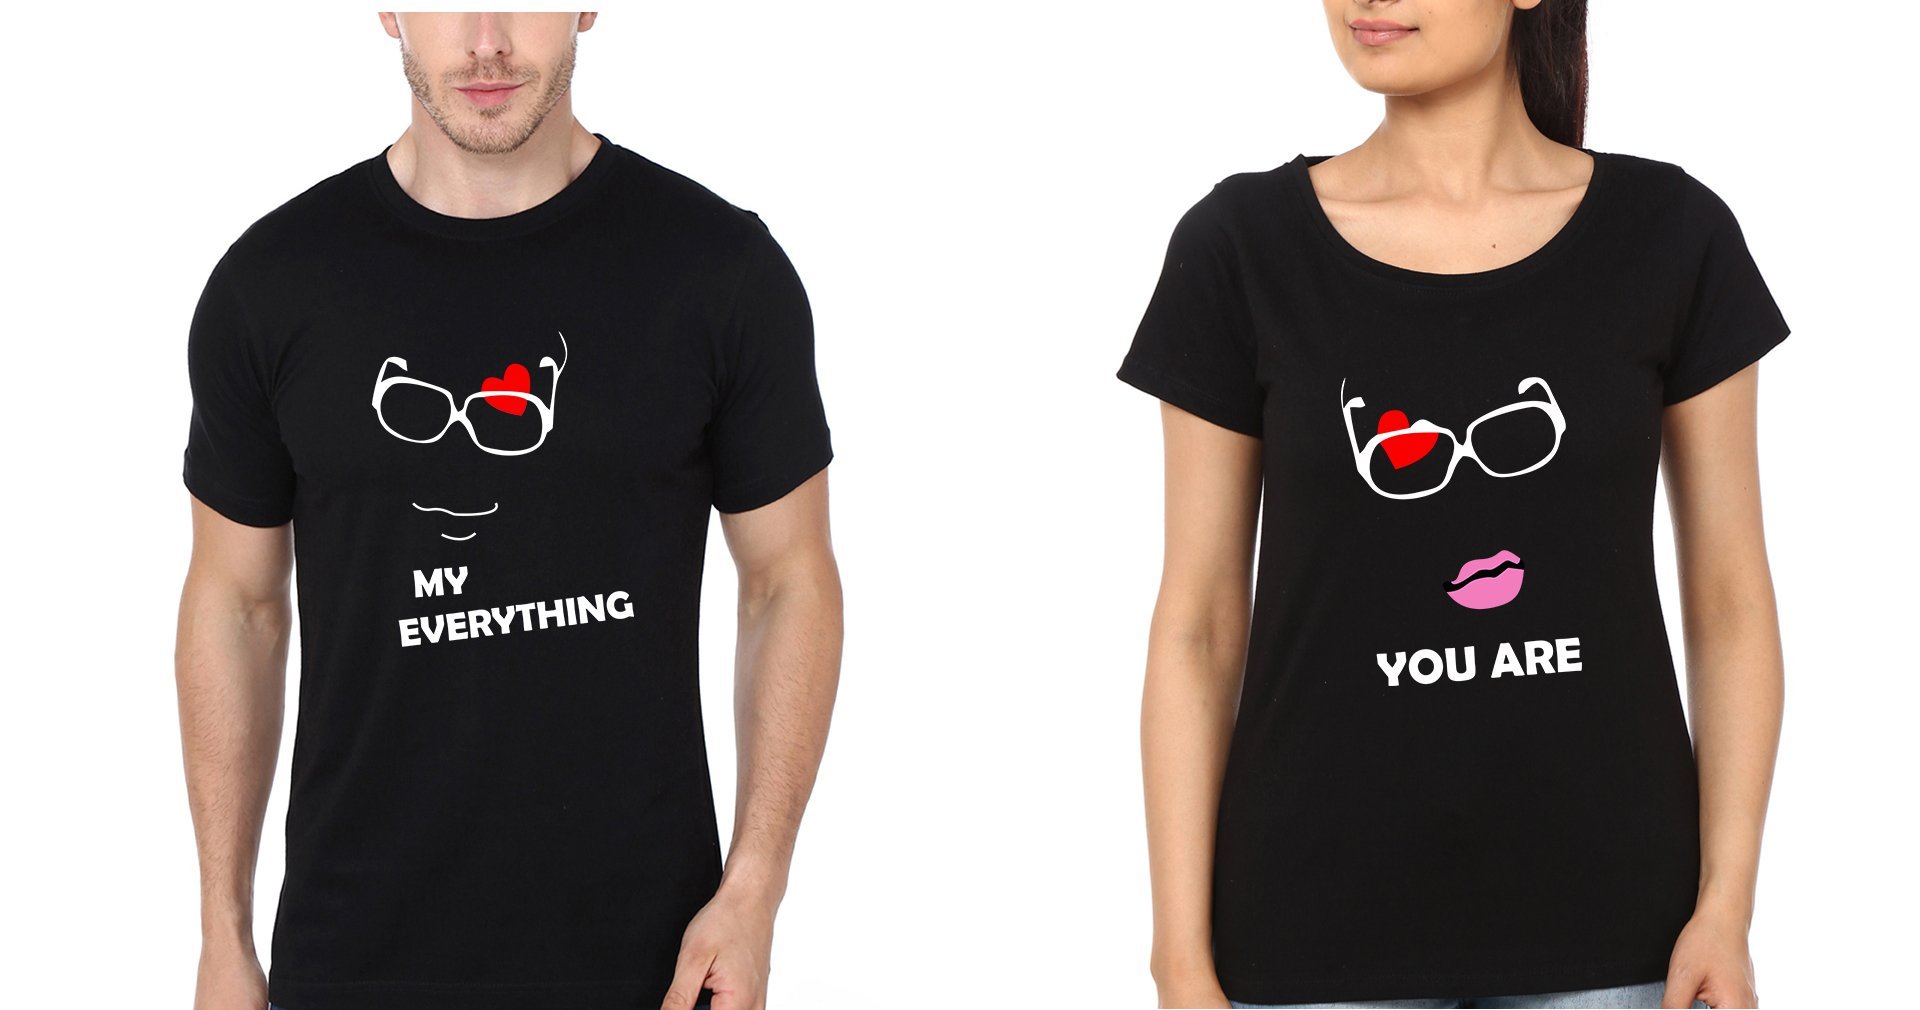 You Are My Everything Couple Half Sleeves T-Shirts -FunkyTees - Funky Tees Club